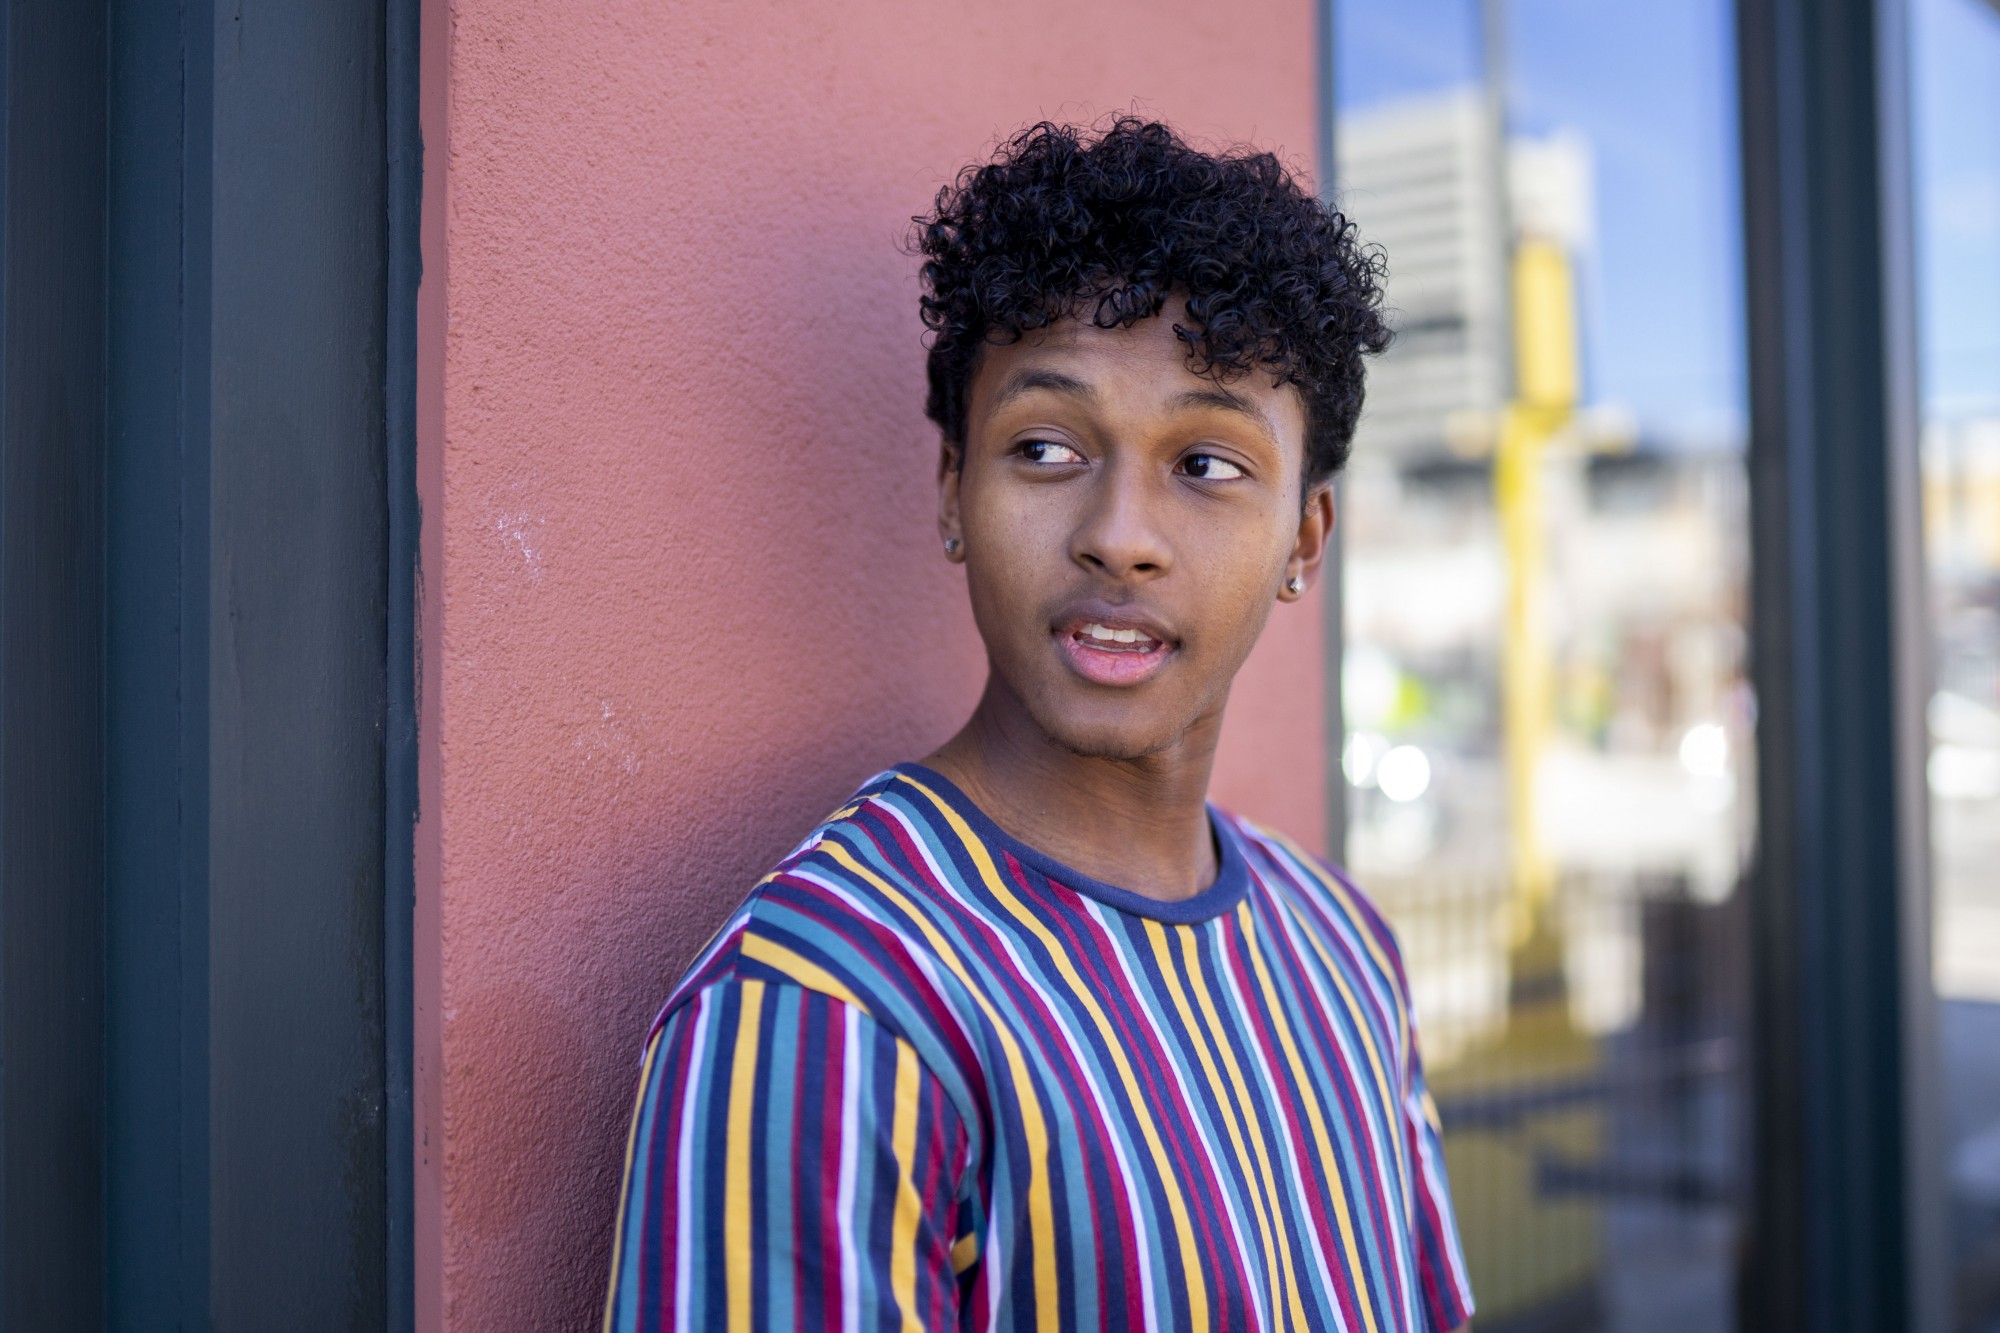 Jeremiah Broadway poses for a portrait in Dinkytown on Sunday, April 19. Artist Lizzo recognized him publicly on TikTok with a response video to his mix of “Good as Hell” and Adele’s “Rolling in the Deep.” The video has received 7.2 over million likes. 